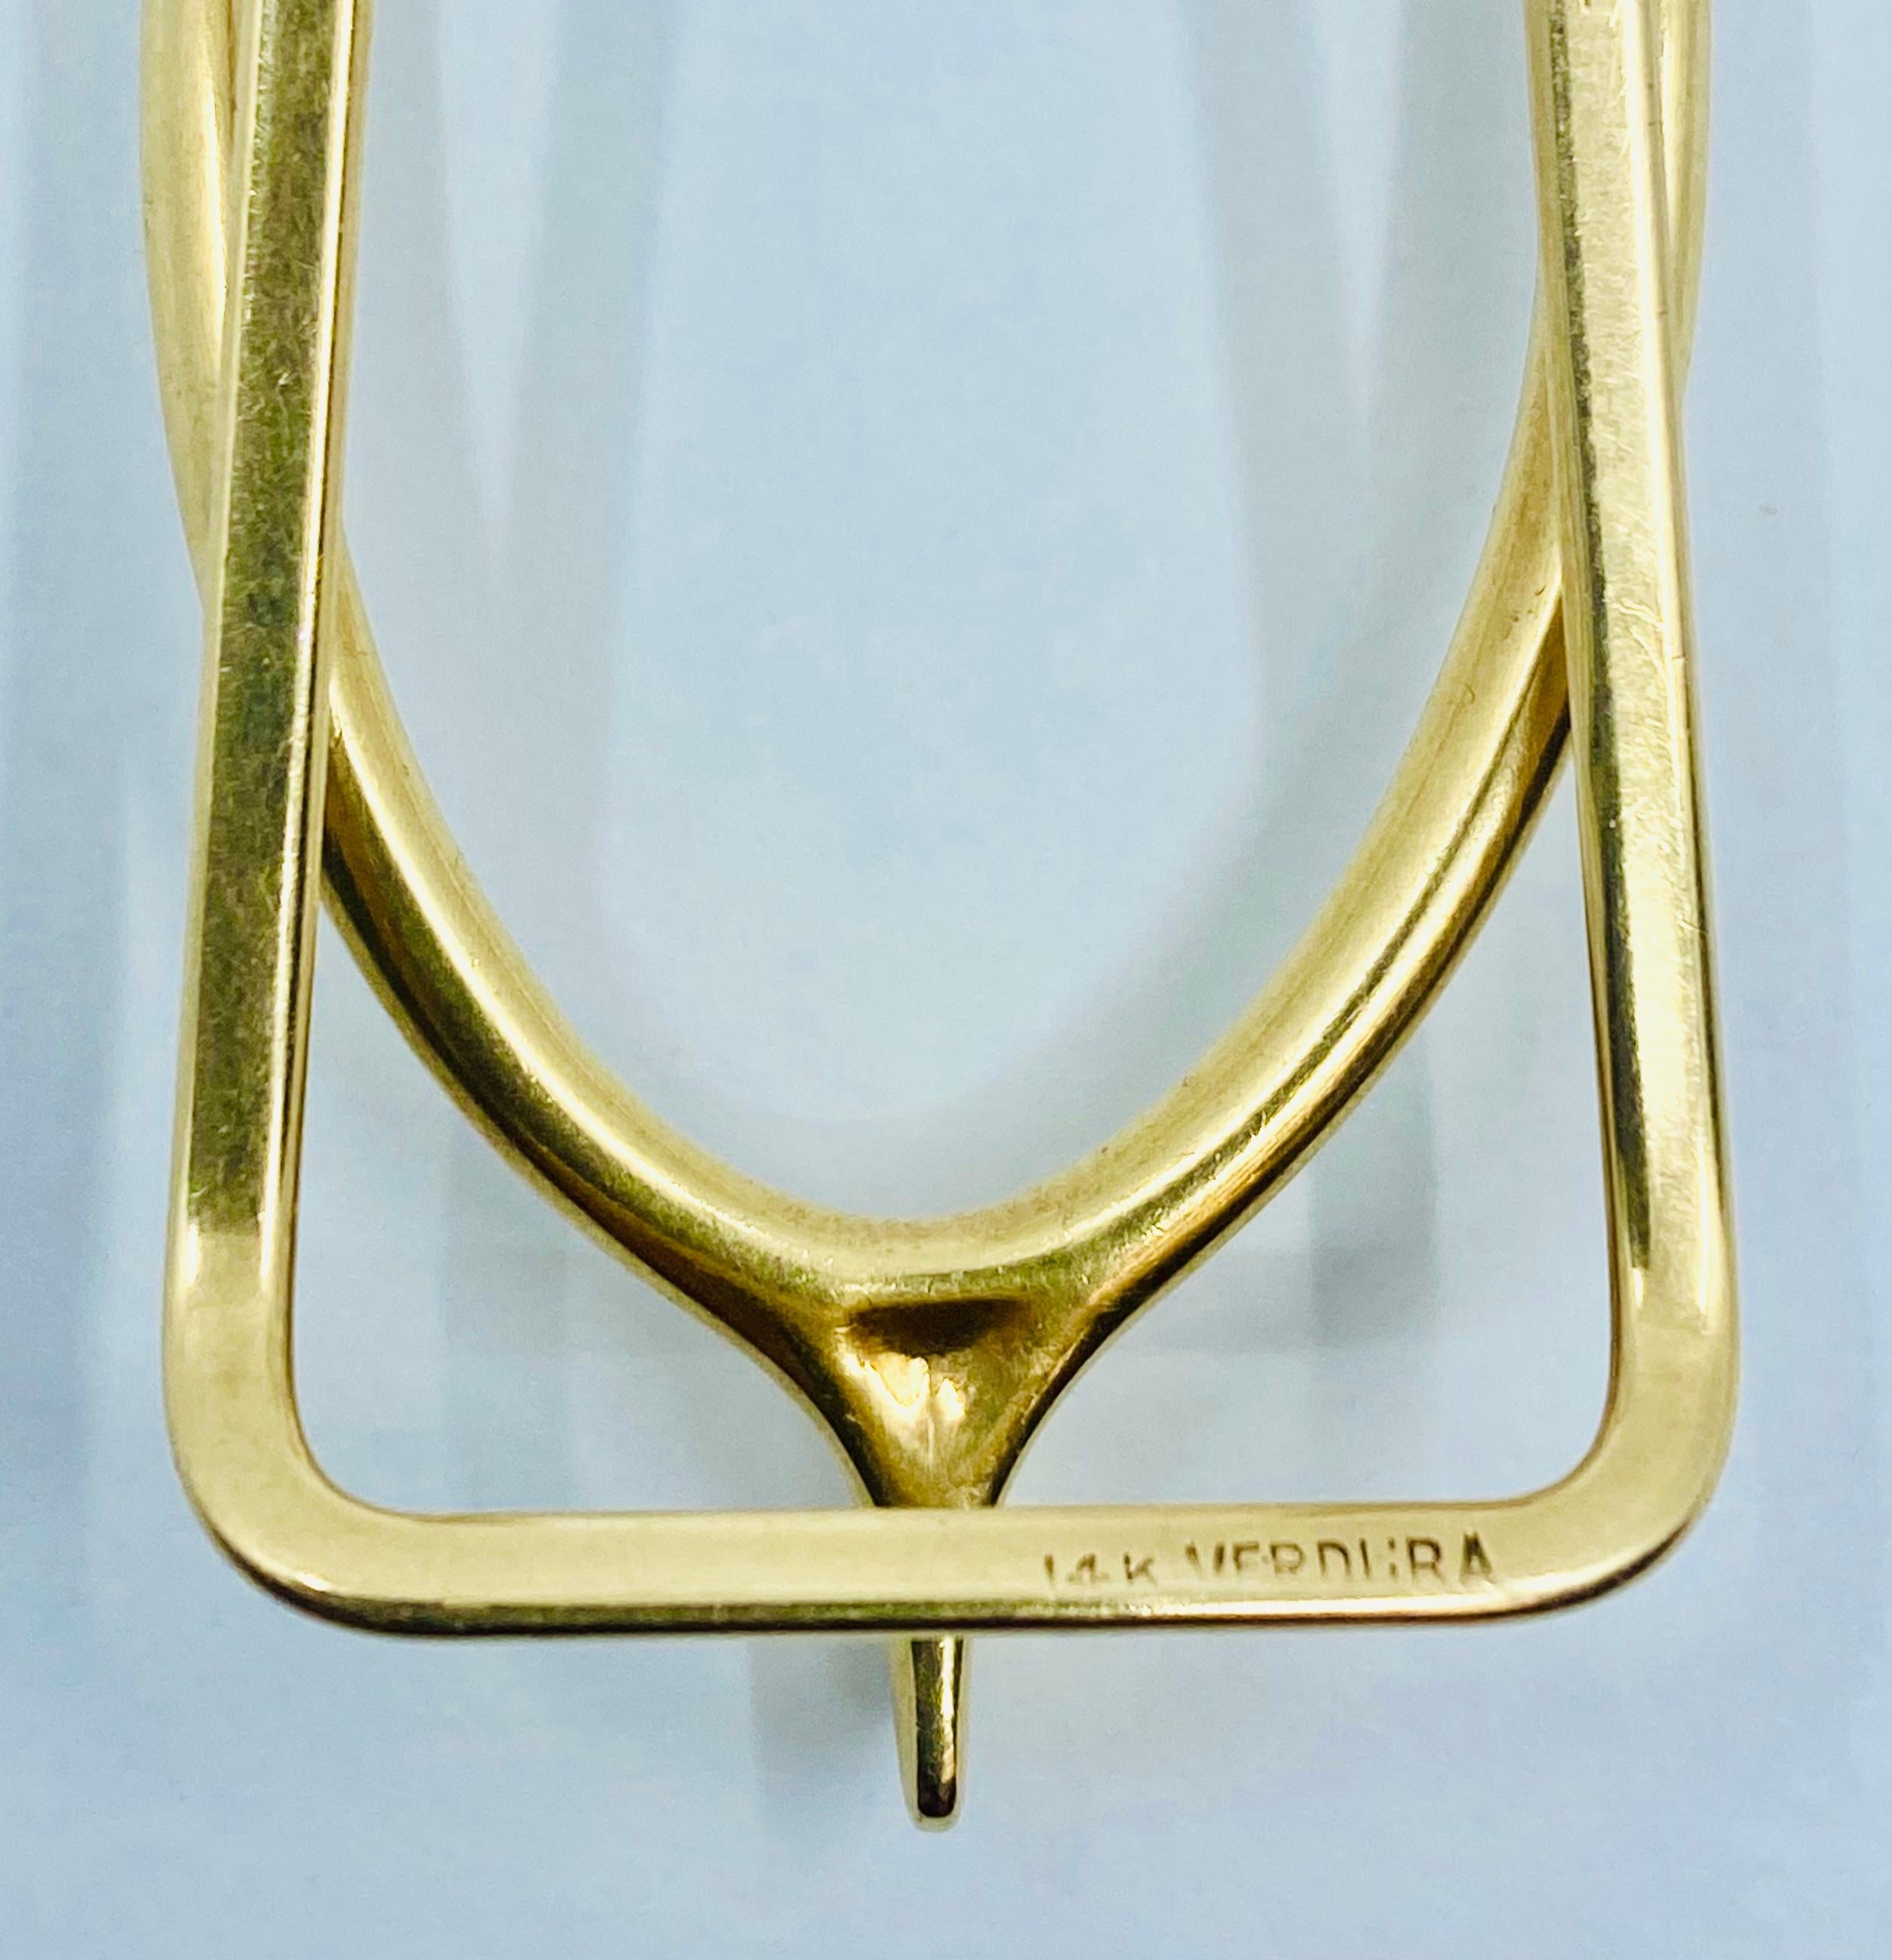 Verdura Gold Wishbone Money Clip In Excellent Condition For Sale In Beverly Hills, CA